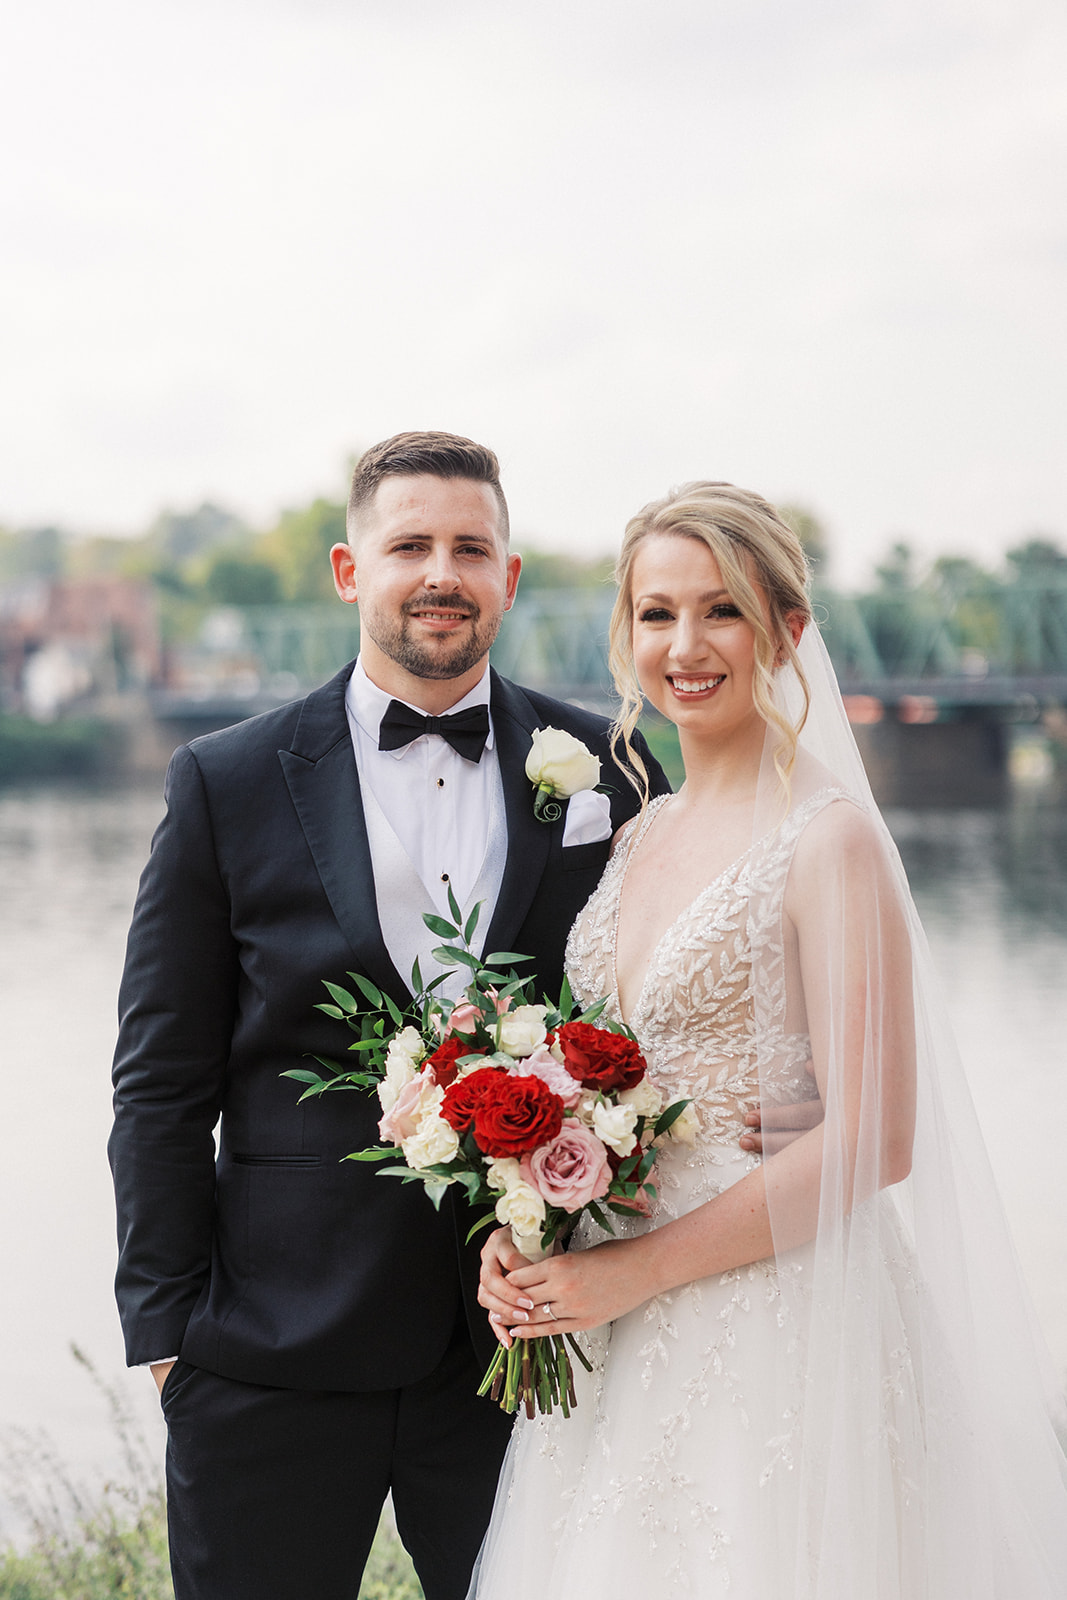 Newlyweds stand together smiling in a riverfront garden